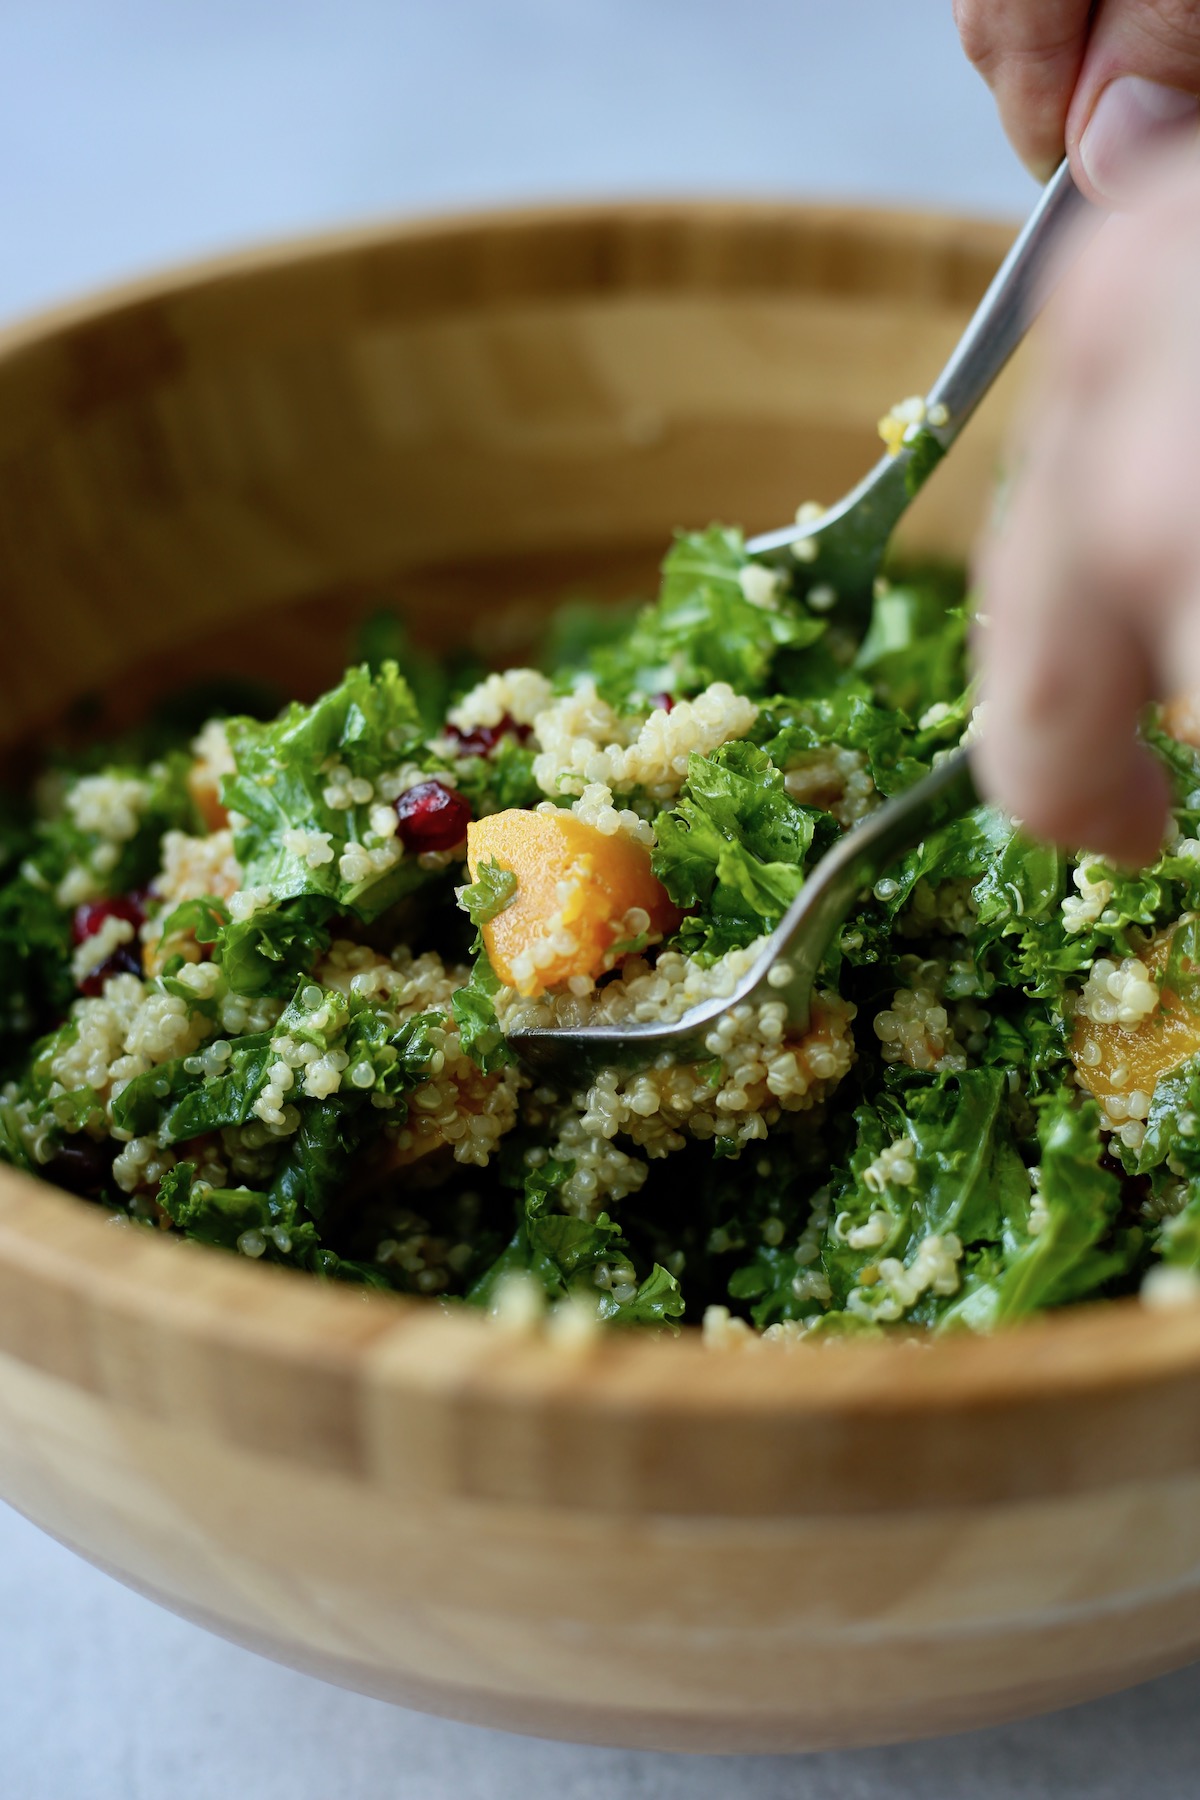 Quinoa, kale and squash salad being scooped out of a wooden bowl with two spoons